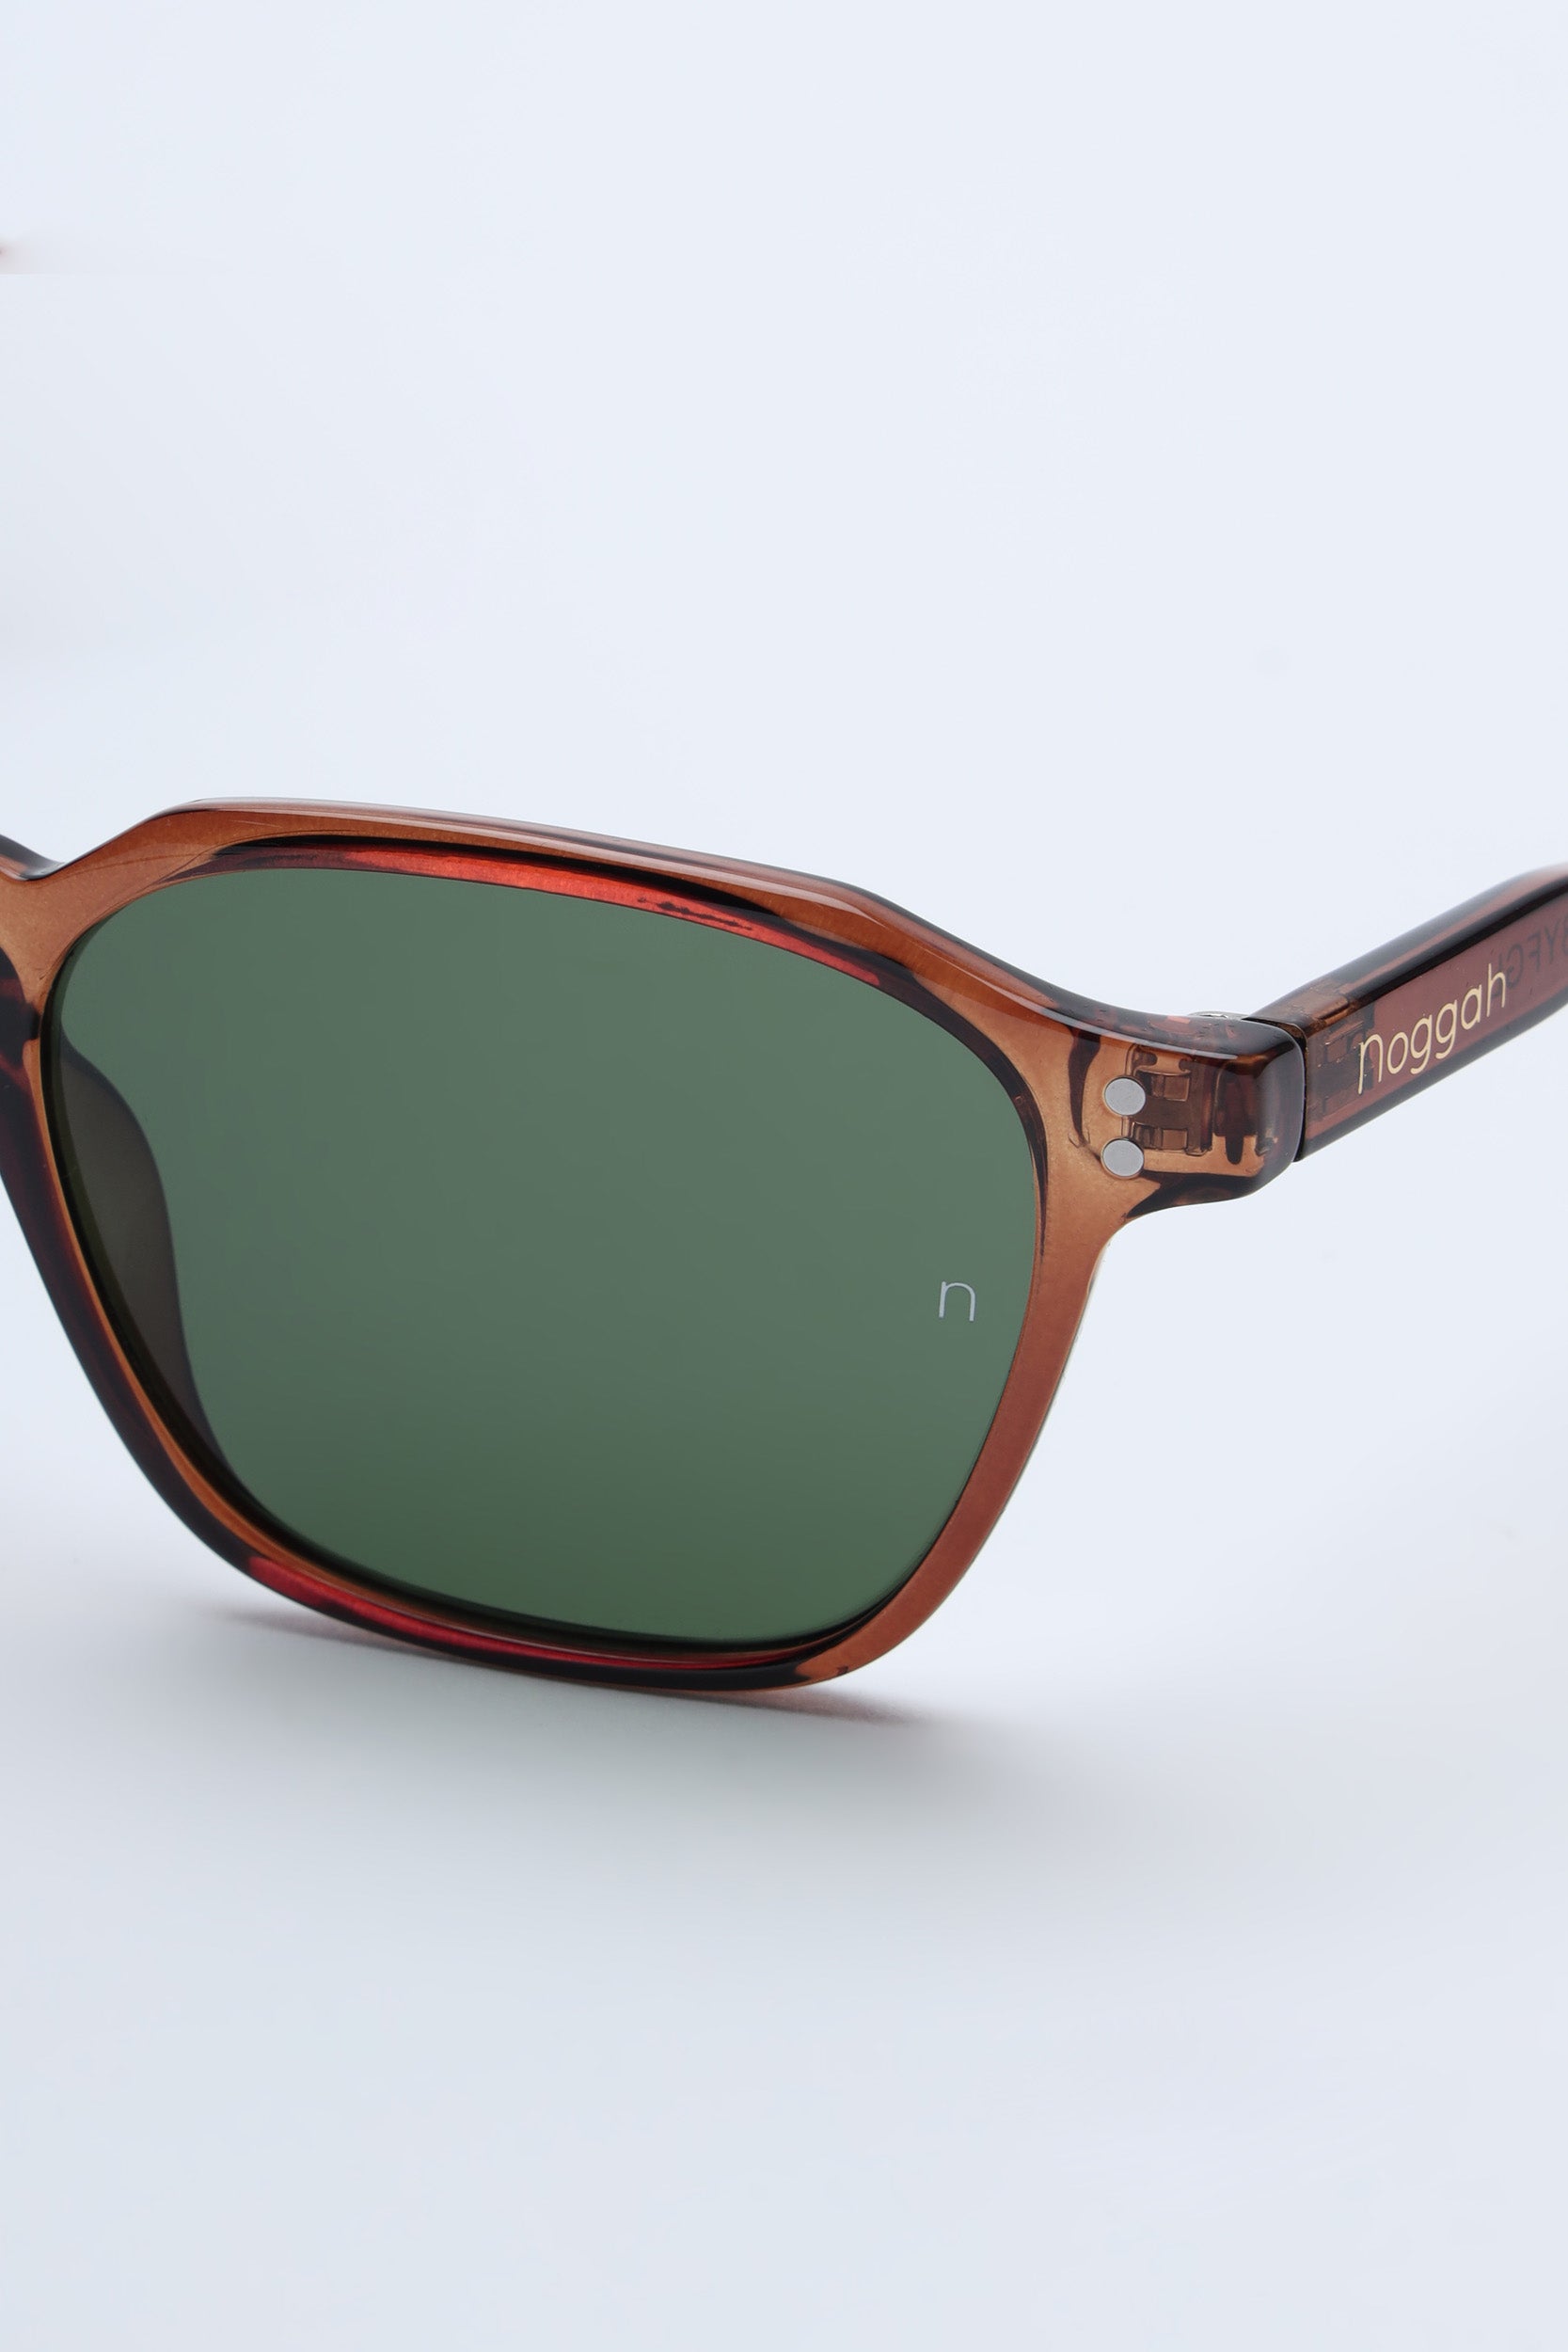 NS1008YFGL PC Brown Frame with Green Glass Lens Sunglasses